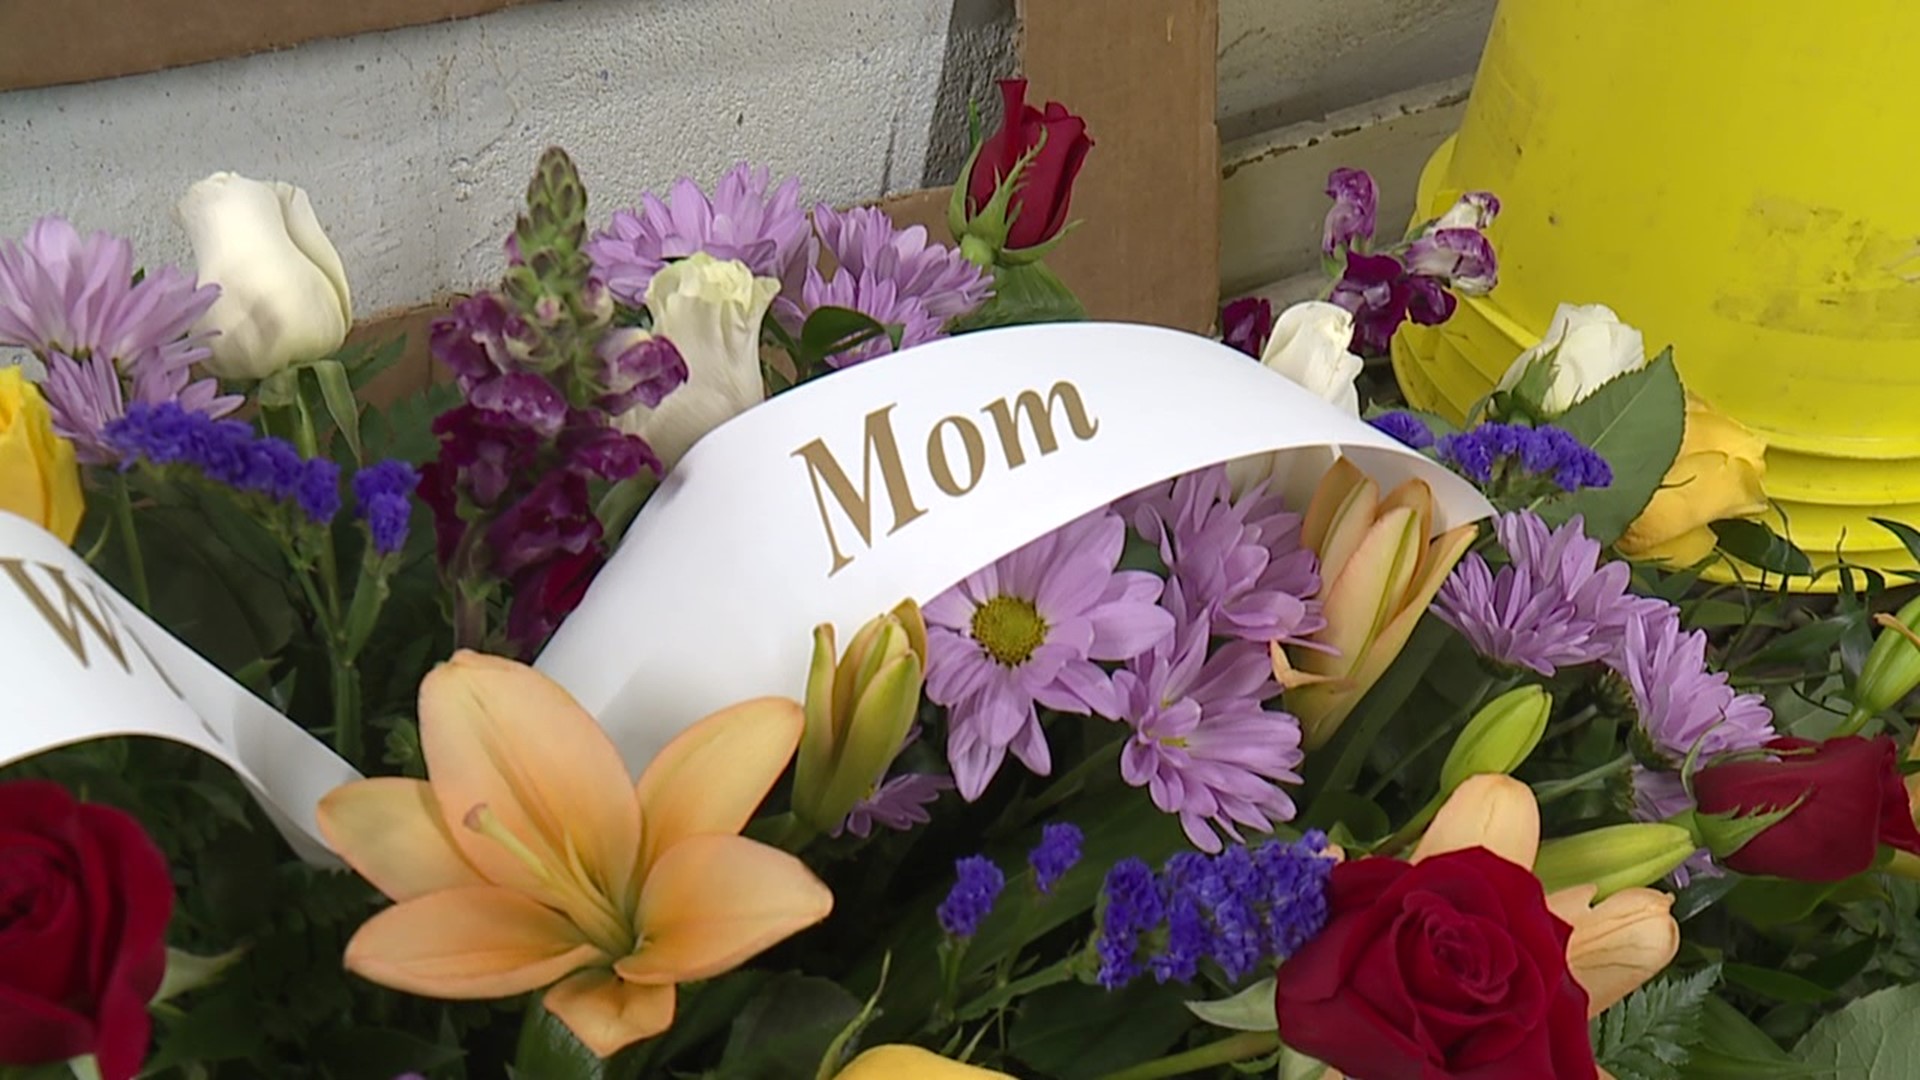 A fire company in Schuylkill County is showing love to all the moms out there by selling Mother's Day flowers.